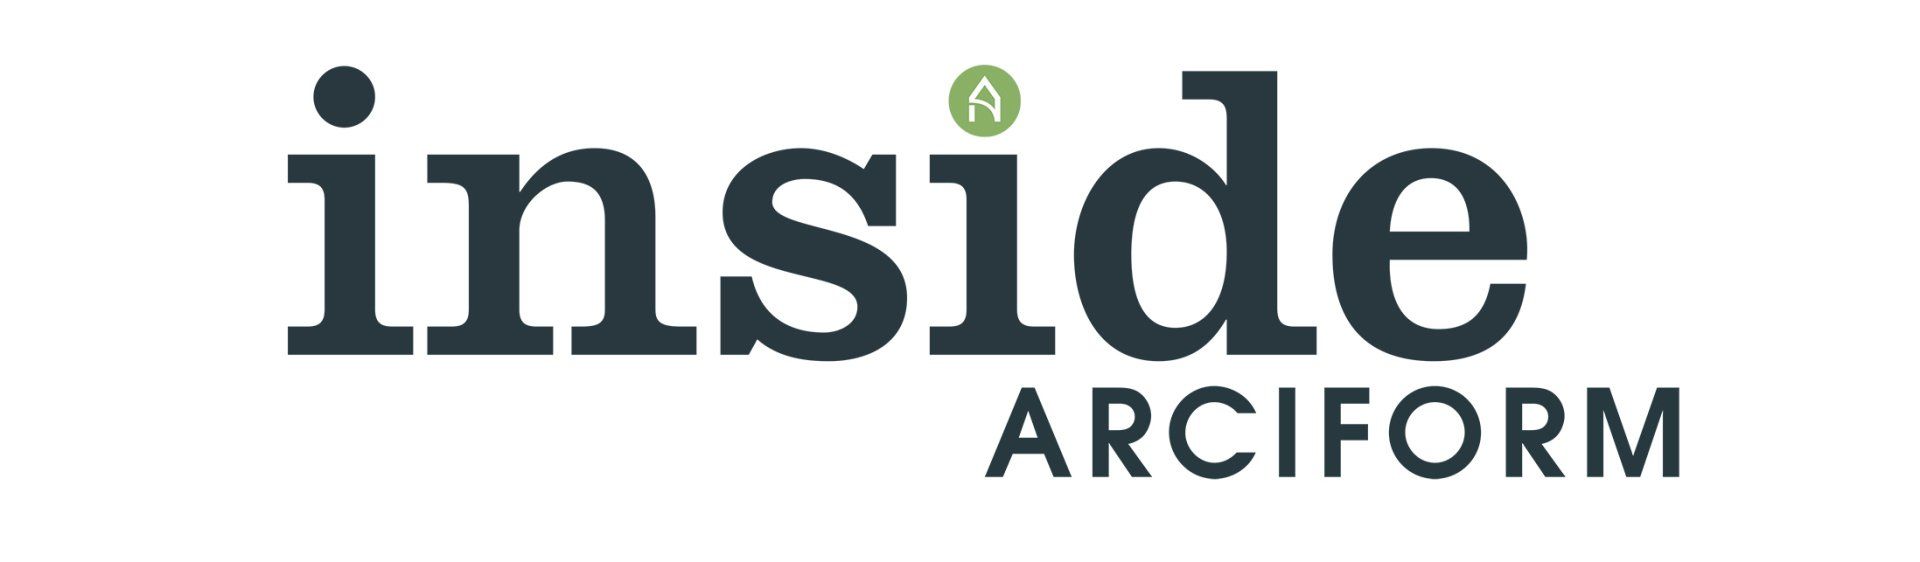 A logo for inside archiform on a white background